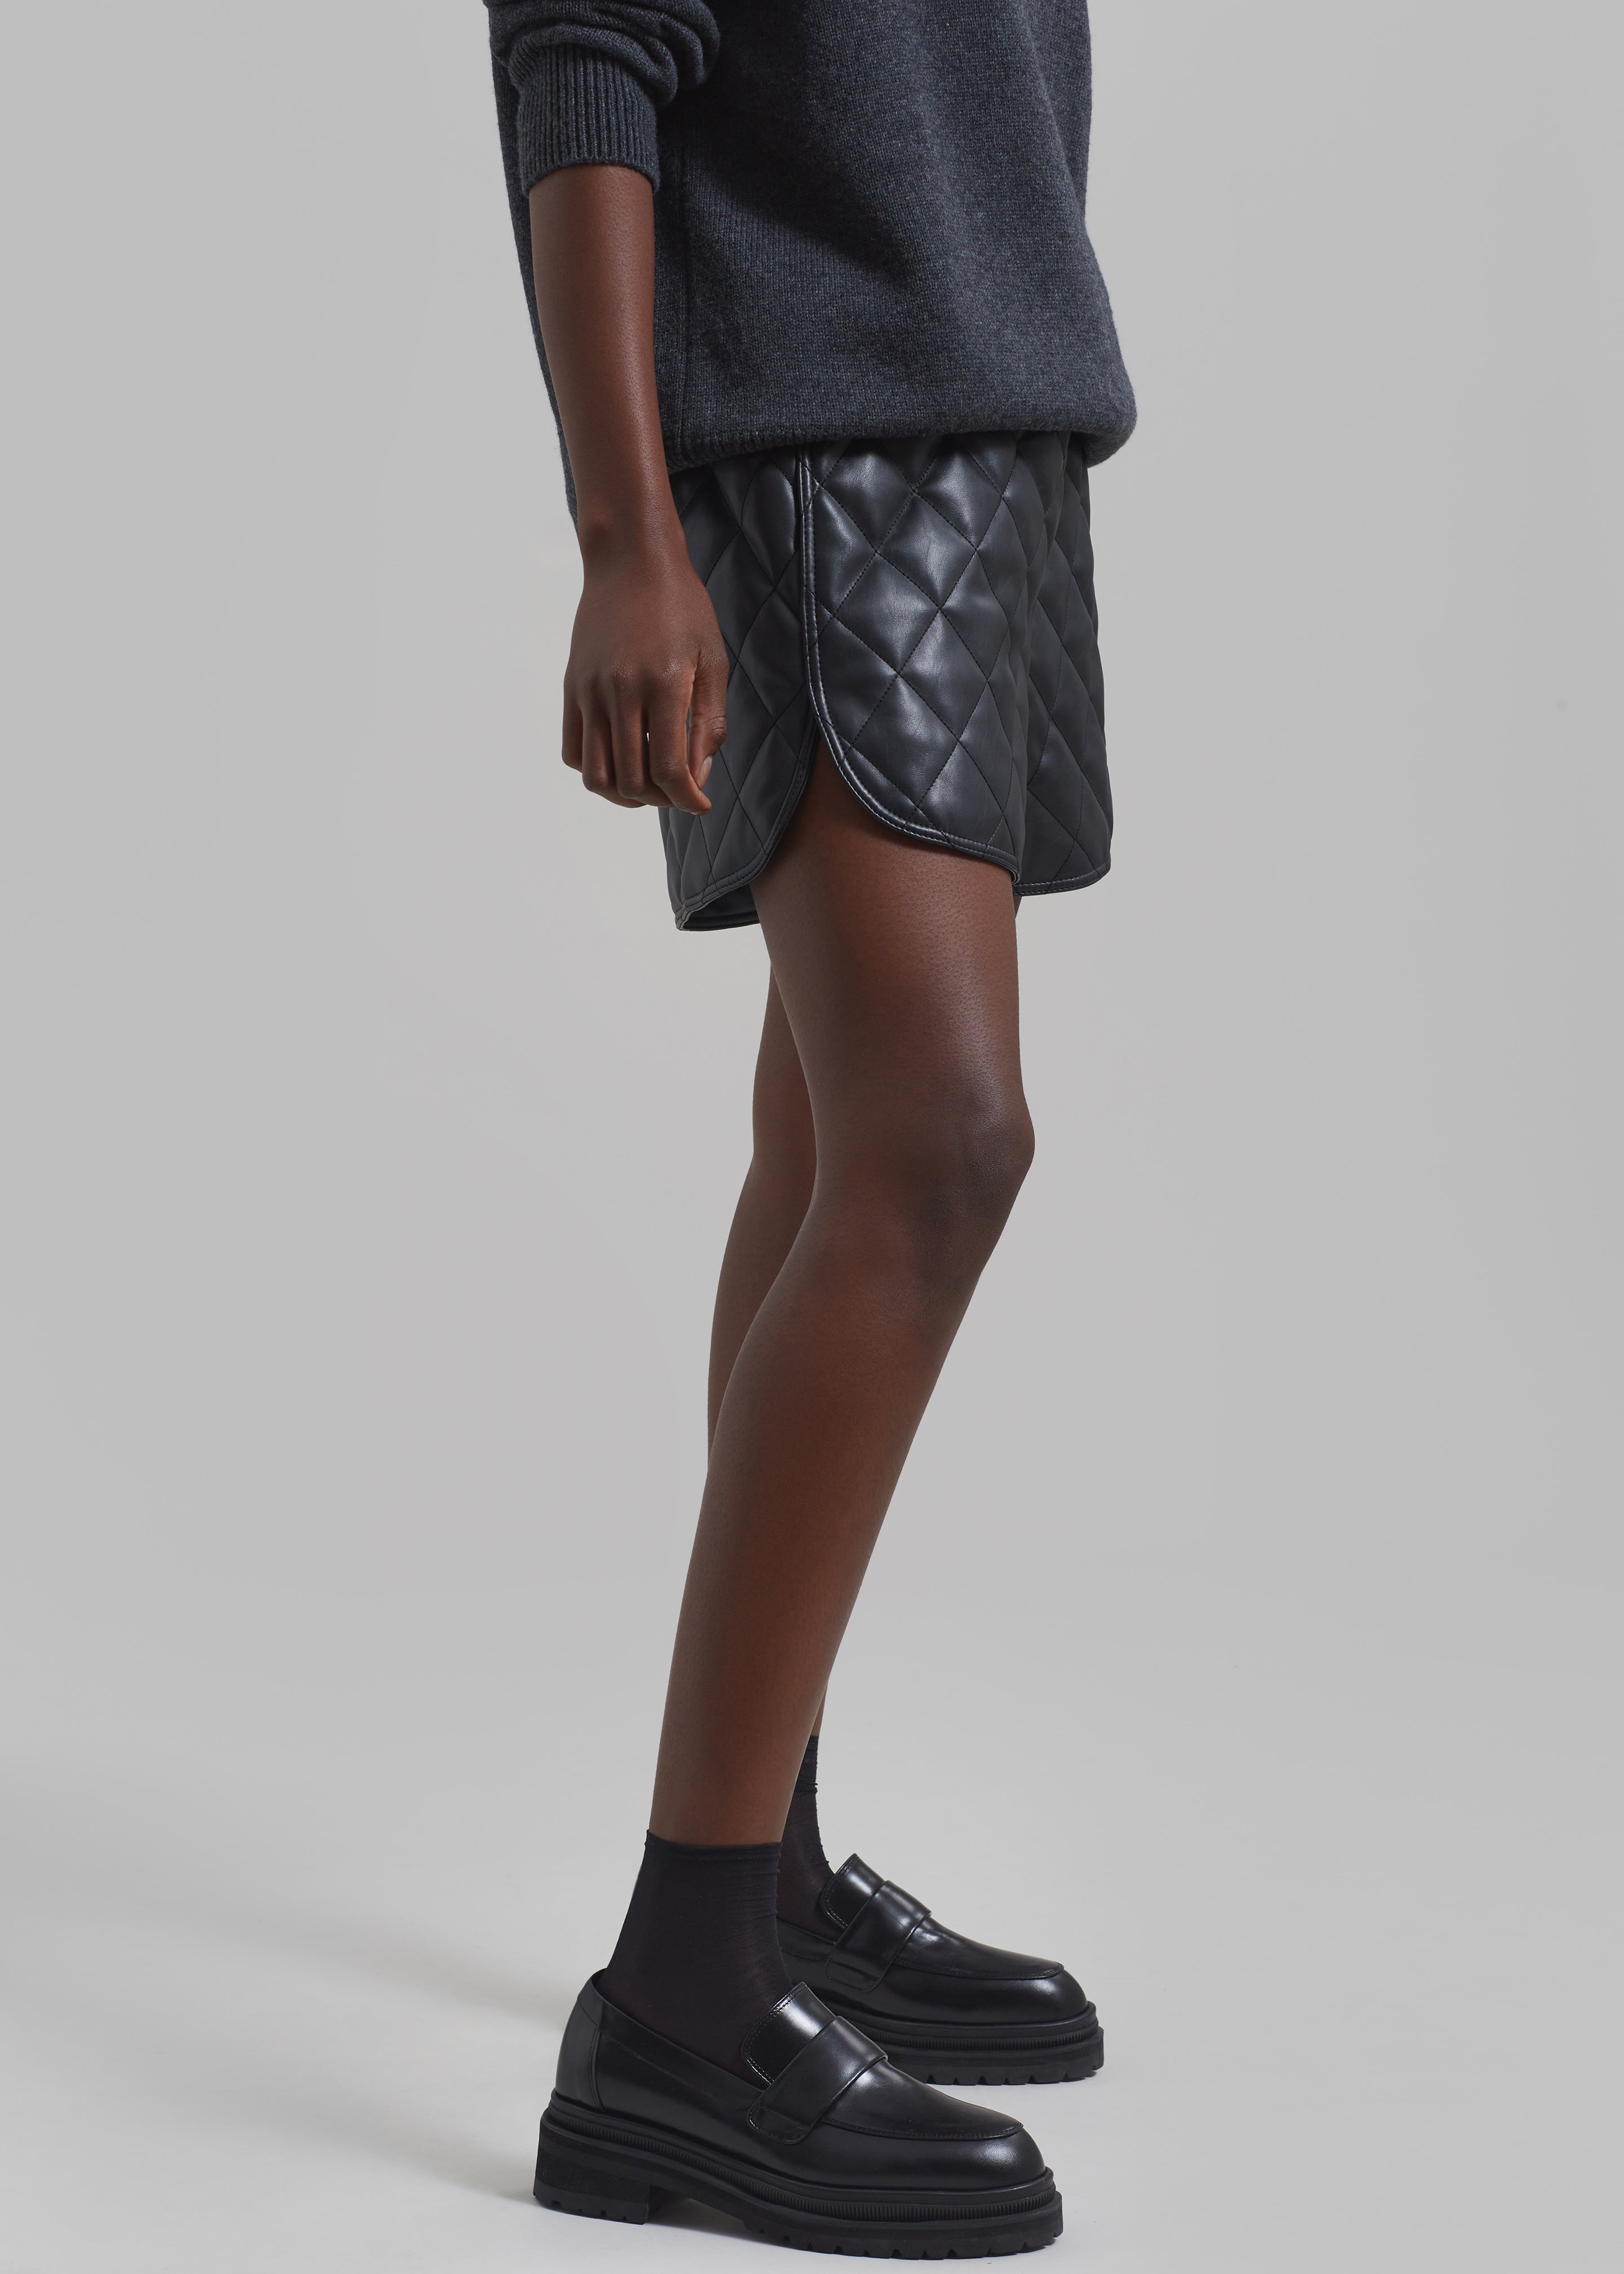 Kingston Faux Leather Quilted Shorts - Black - 7